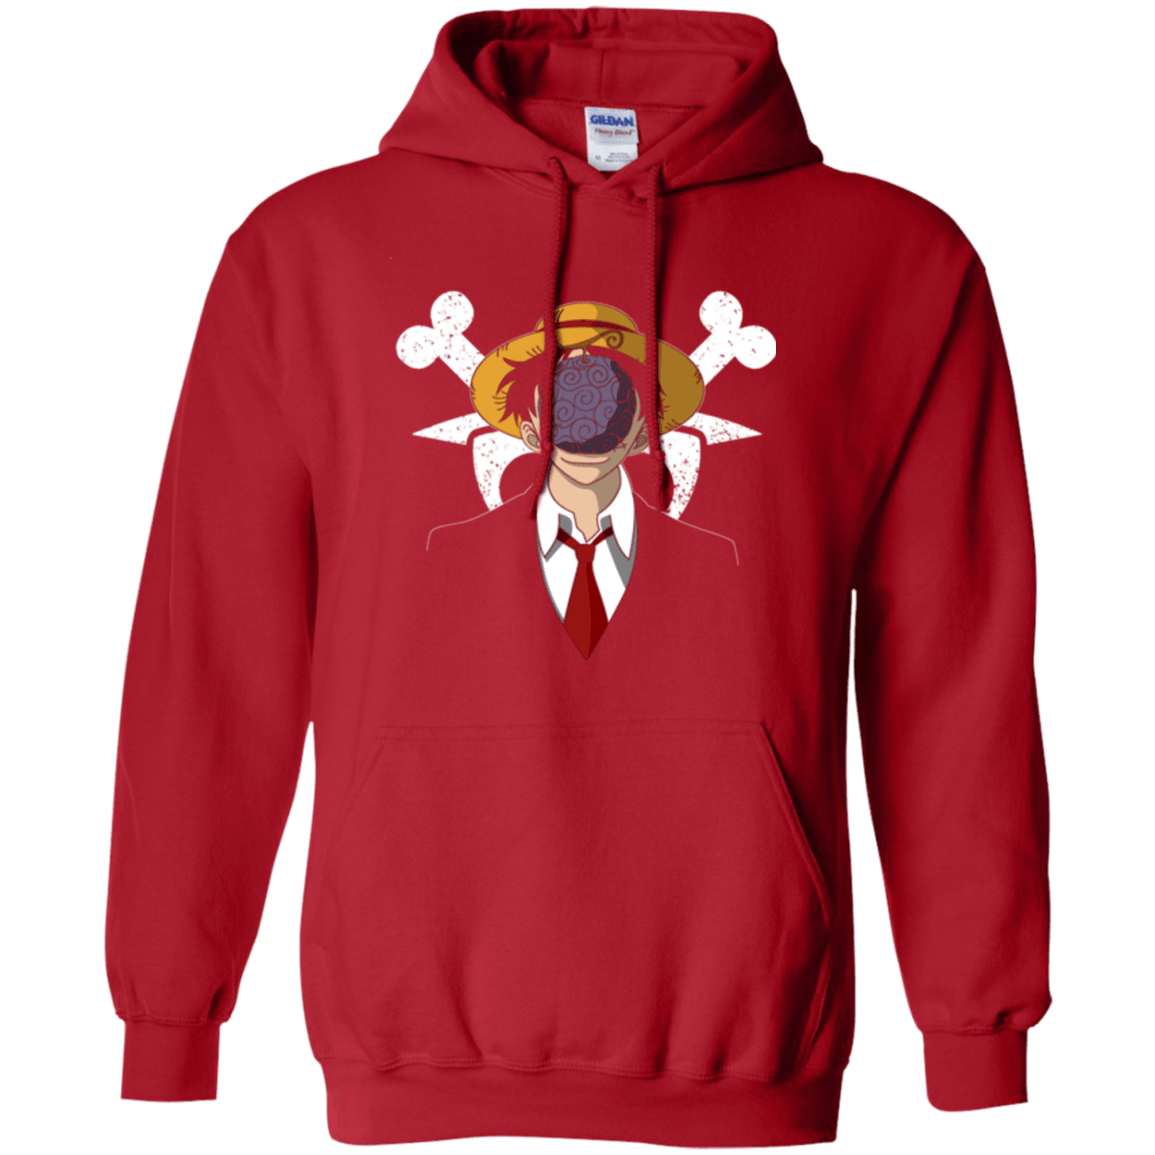 Sweatshirts Red / Small Son of pirates Pullover Hoodie